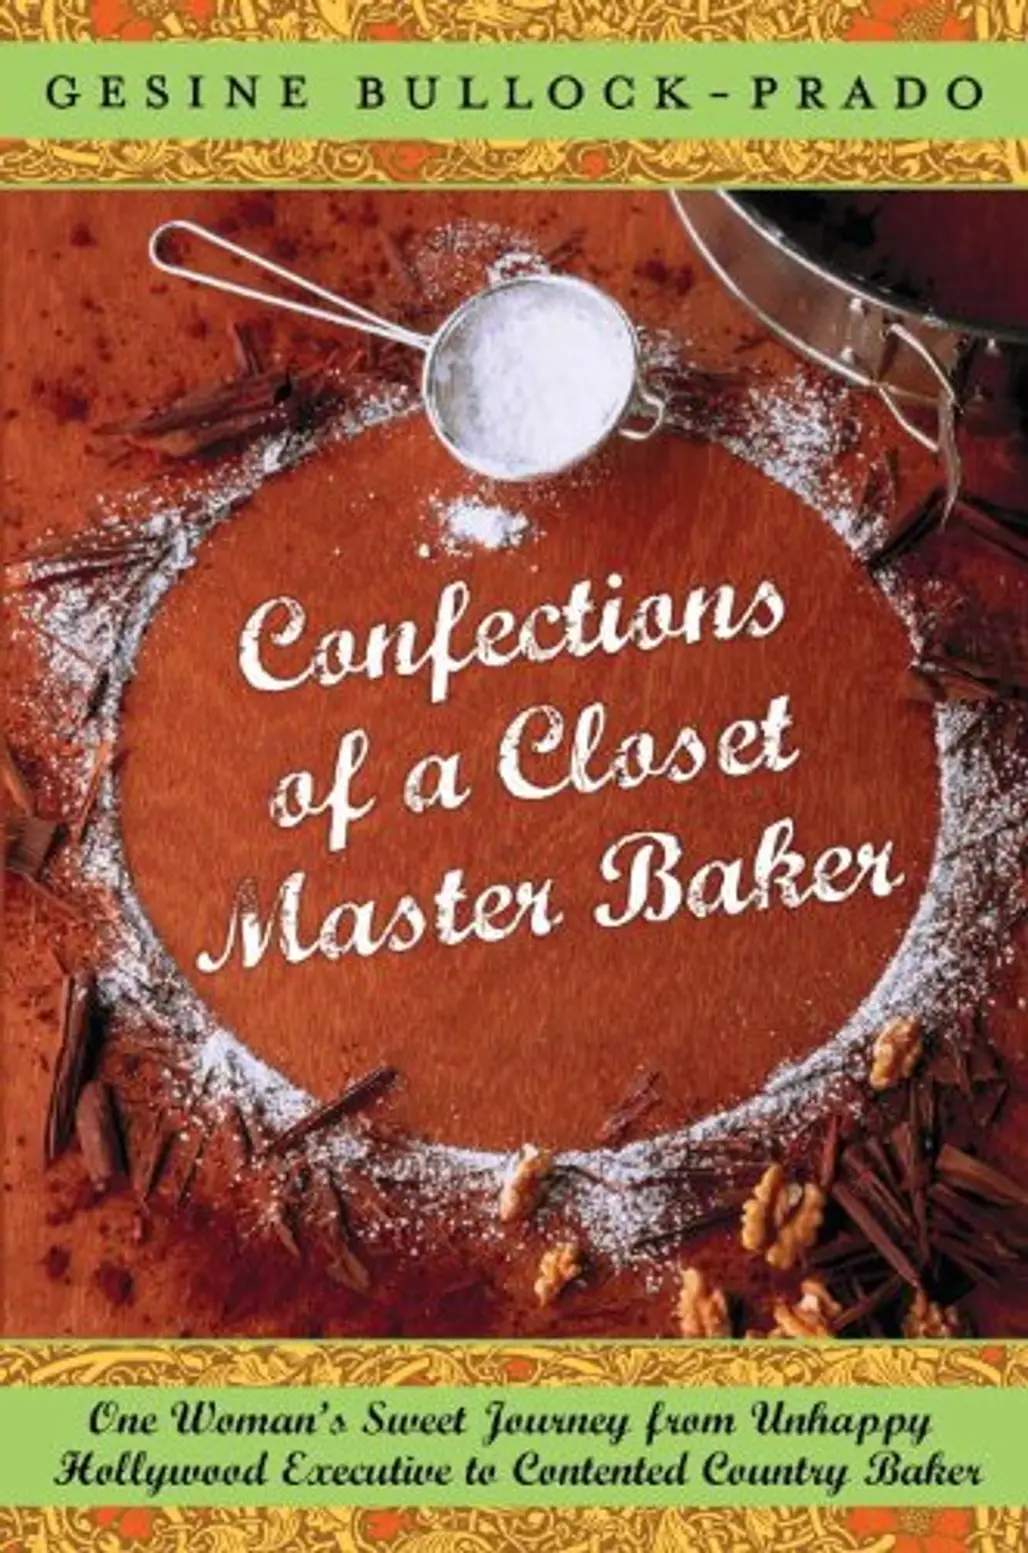 “Confections of a Closet Master Baker: One Woman's Sweet Journey from Unhappy Hollywood Executive to Contented Country Baker” by Gesine Bullock Prado